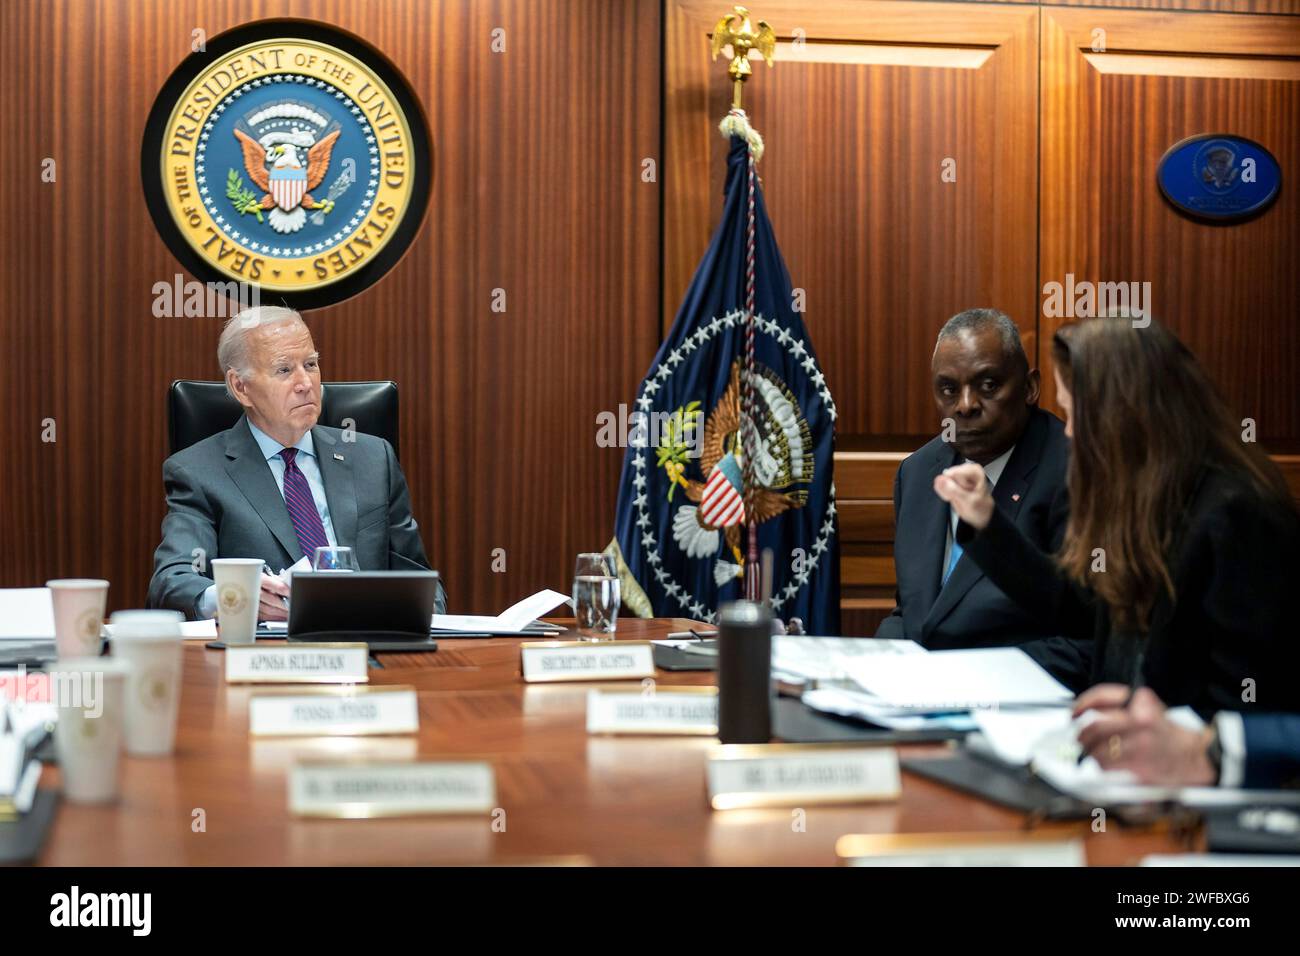 Washington, United States Of America. 29th Jan, 2024. Washington, United States of America. 29 January, 2024. U.S President Joe Biden, left, and Secretary of Defense Lloyd Austin, right, listen during the Presidential Daily Briefing, in the White House Situation Room of the White House, January 29, 2024 in Washington, DC This is the first appearance of Lloyd Austin since his recovery from surgery. Credit: Adam Schultz/White House Photo/Alamy Live News Stock Photo